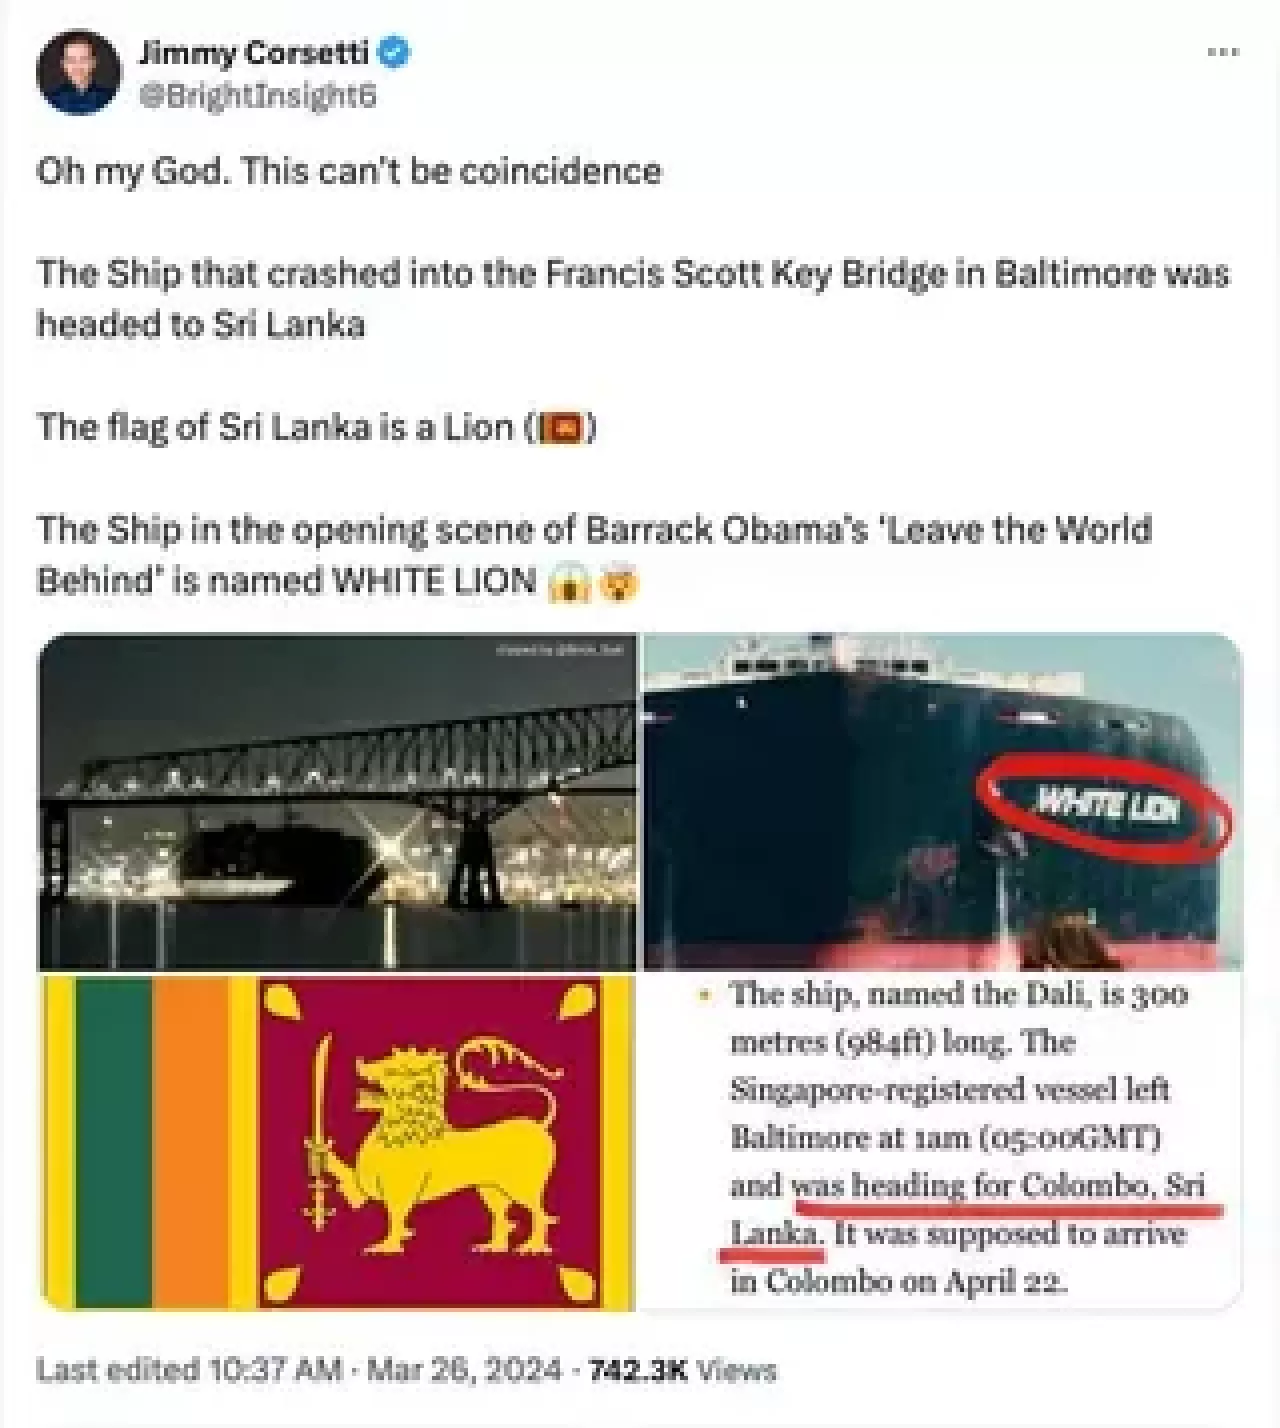 Jimmy Corsetti post draws a tenuous connection between the bridge collapse and Obama film.